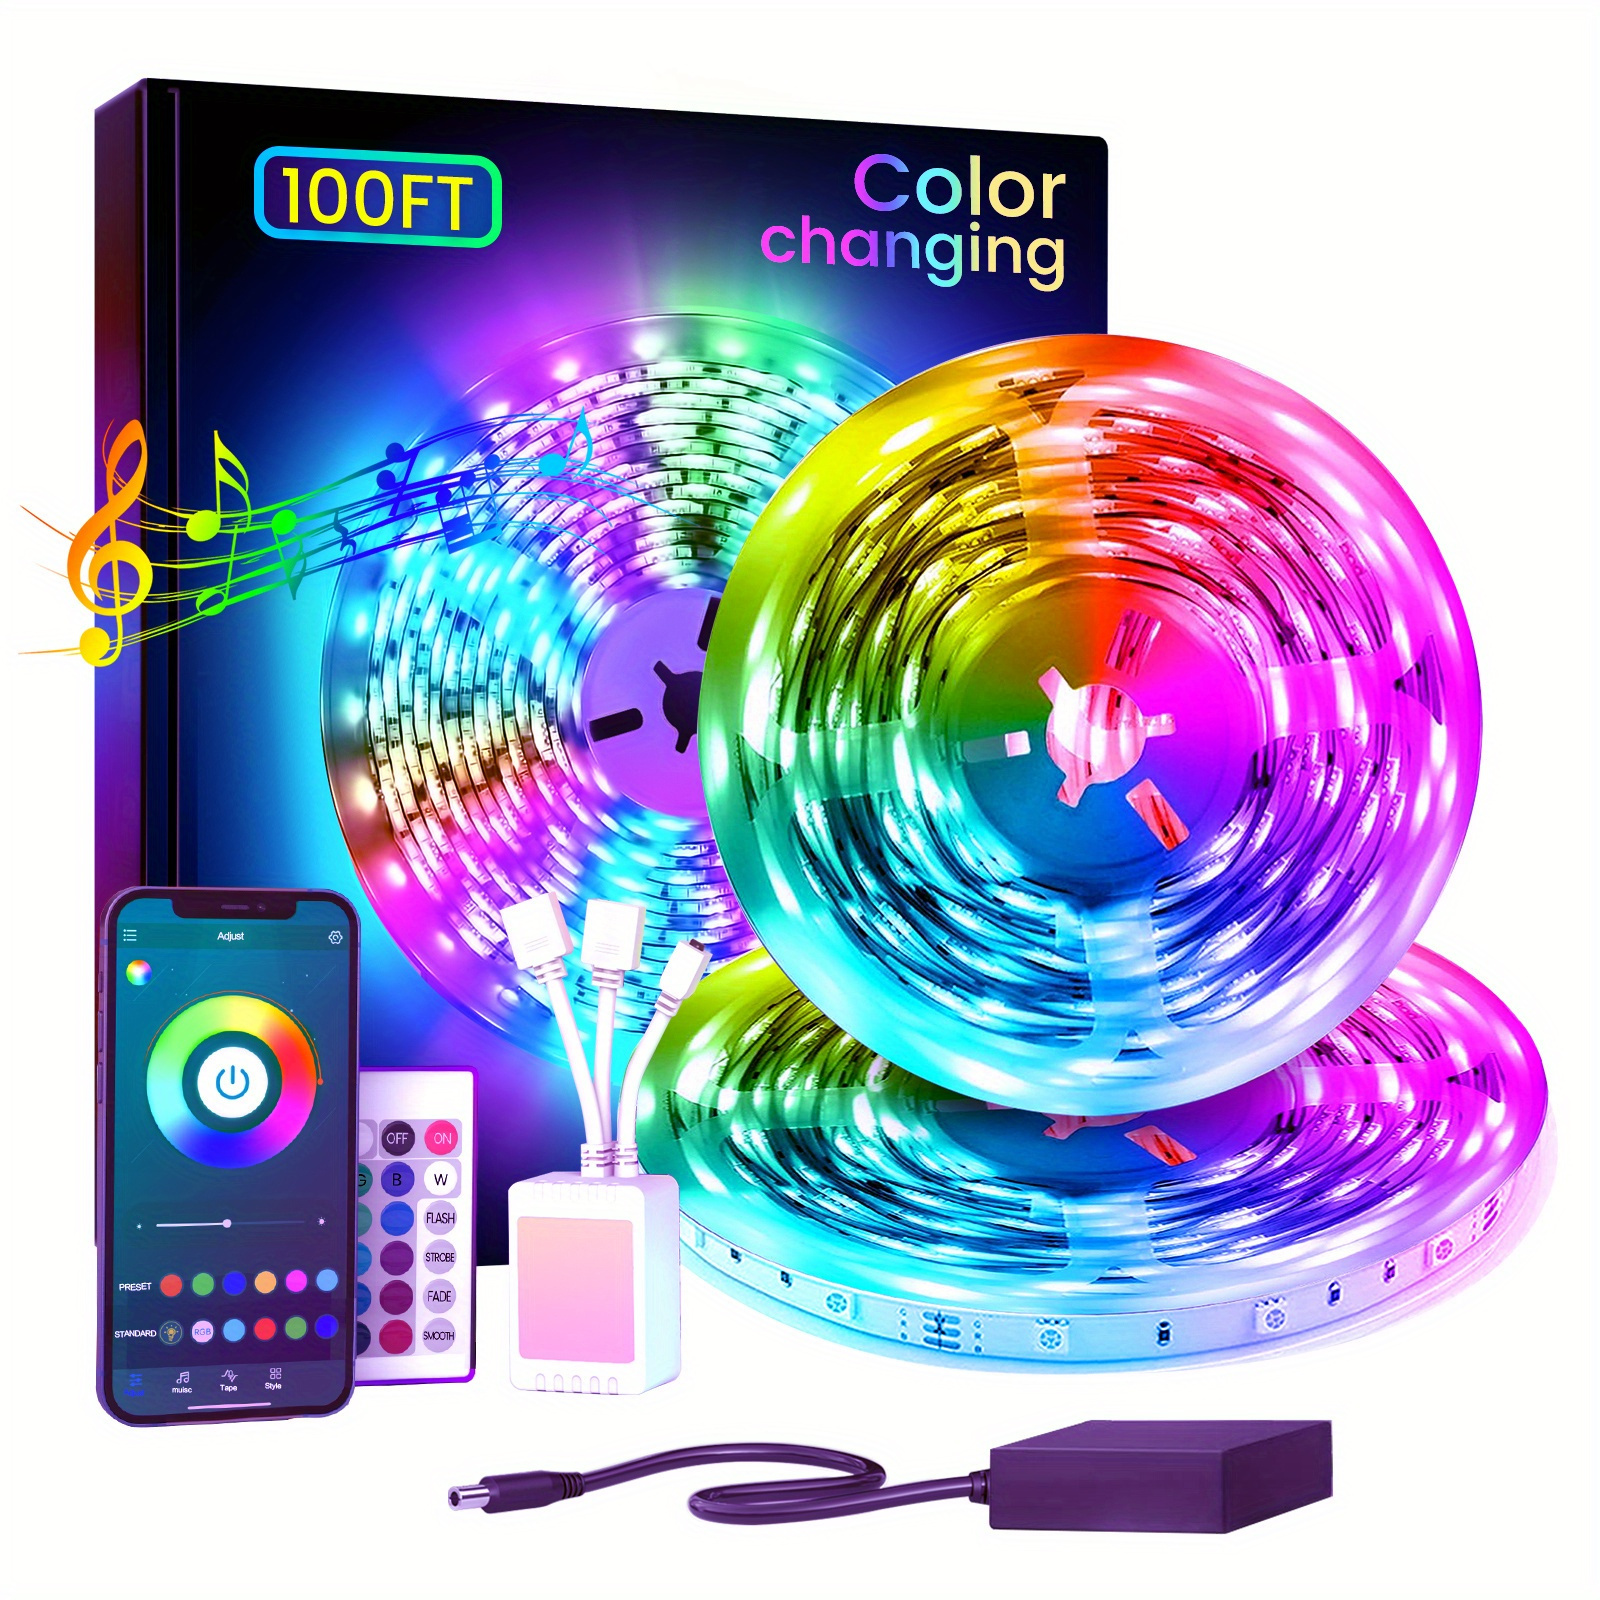 

100ft 30m Led Strip Lights, Lights With App Control And Remote, Music Sync Color Changing Lights, Rgb Led Lights 24v For Bedroom, Home, Party Decoration Strips (2 Rolls Of 15m)